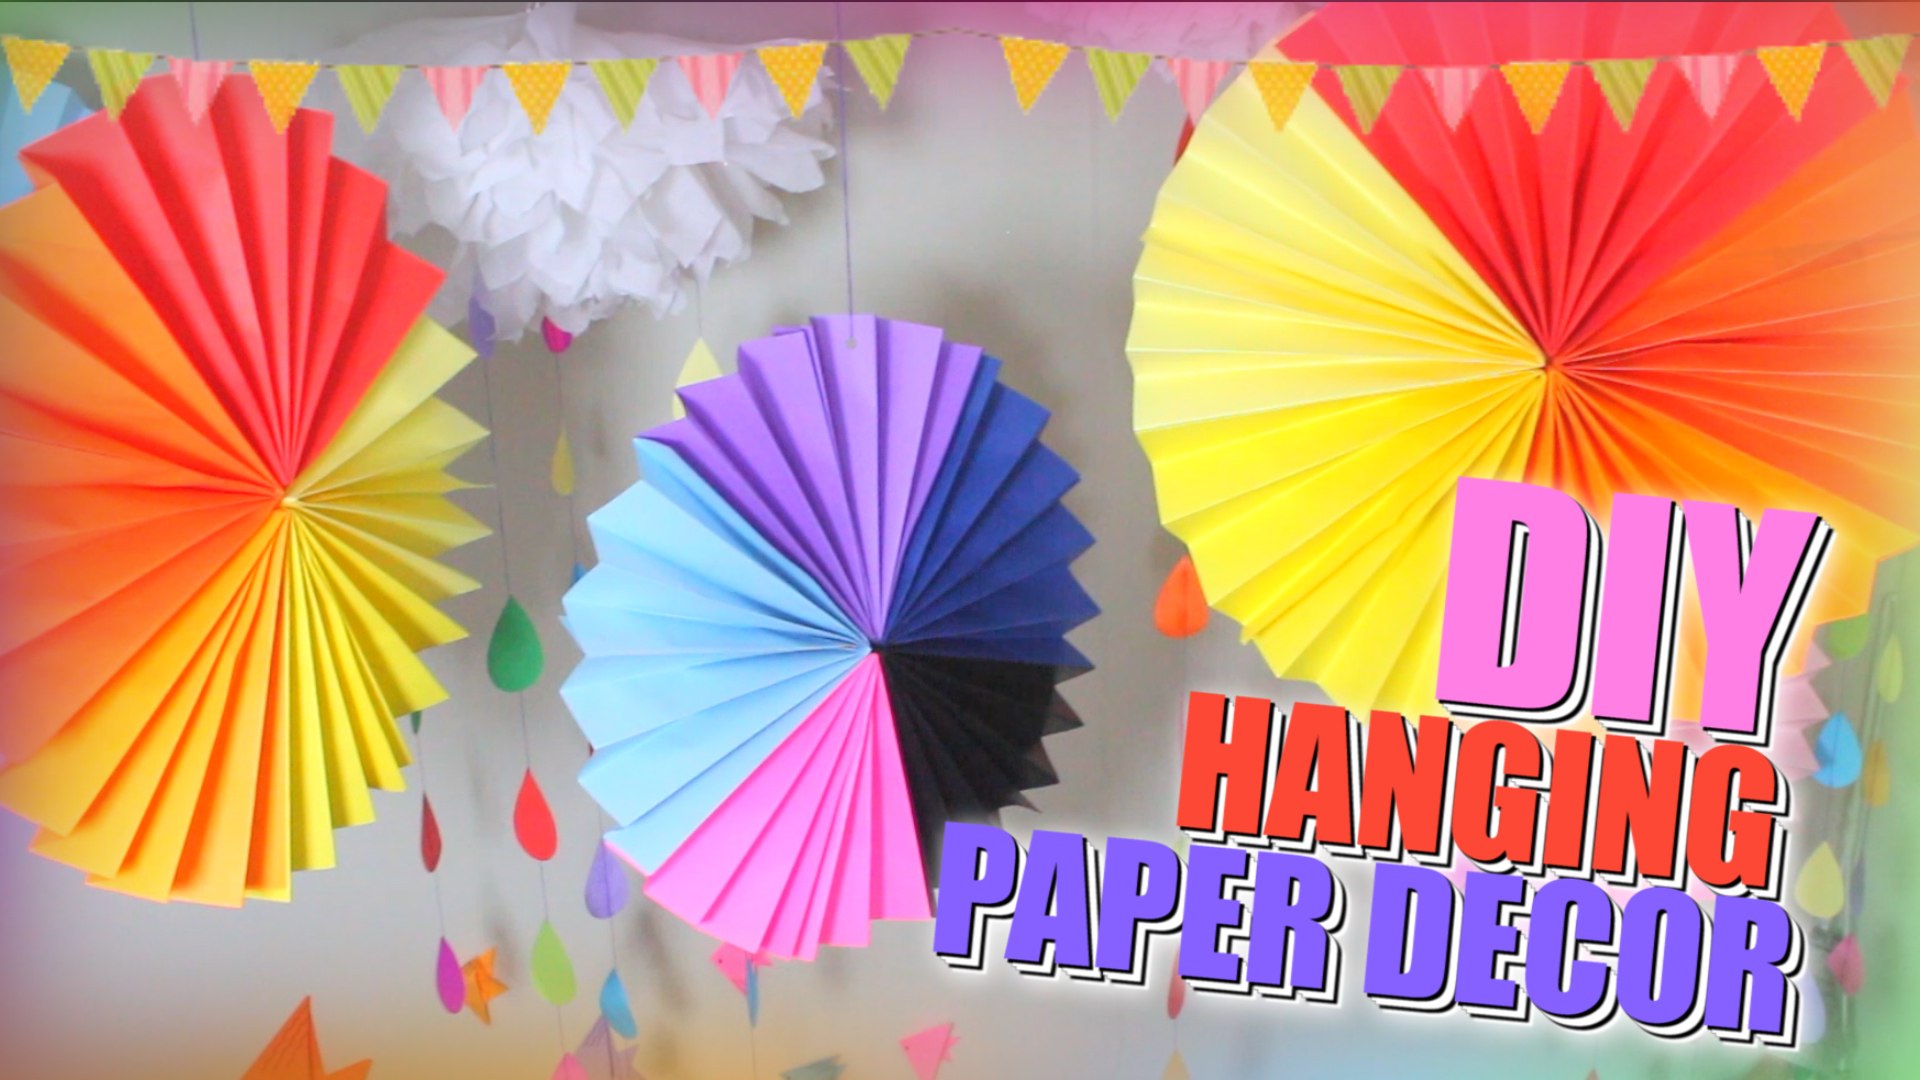 DIY Paper Crafts / How to make DIY SUMMER Party Decor using ORIGAMI ideas /  Easy homemade decorations that impress - video Dailymotion